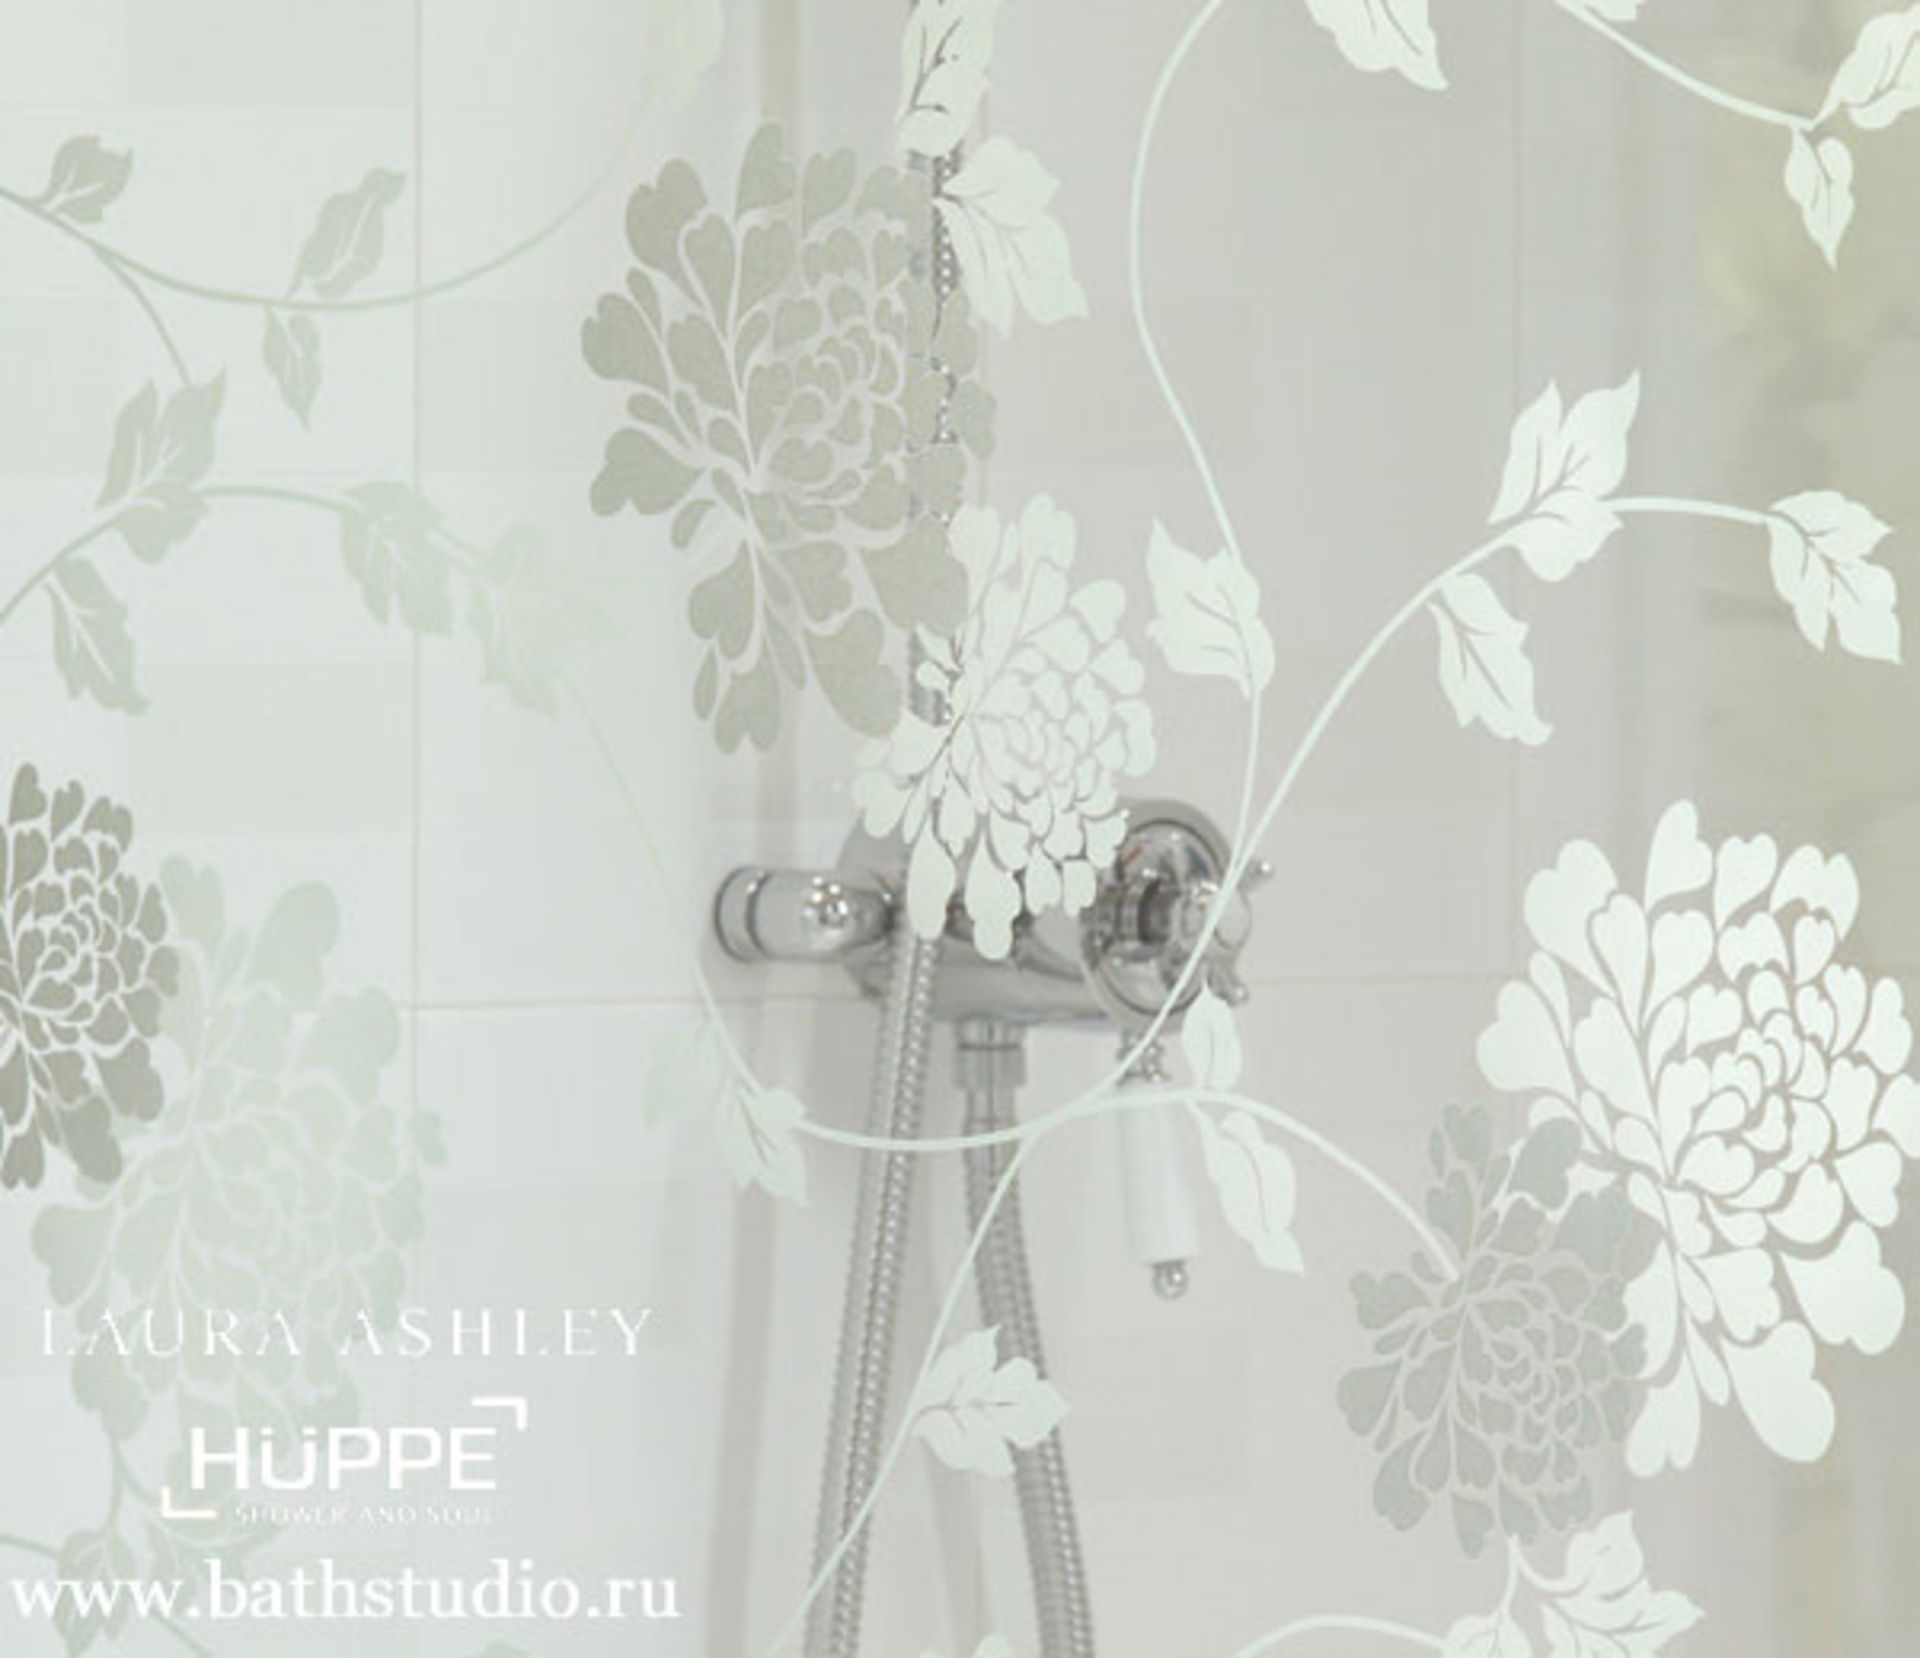 Laura Ashley by Huppe' 4-Eck Walk in Side Panel. 885 - 900 x 2000mm, High Gloss Silver & Isodore - Image 2 of 3